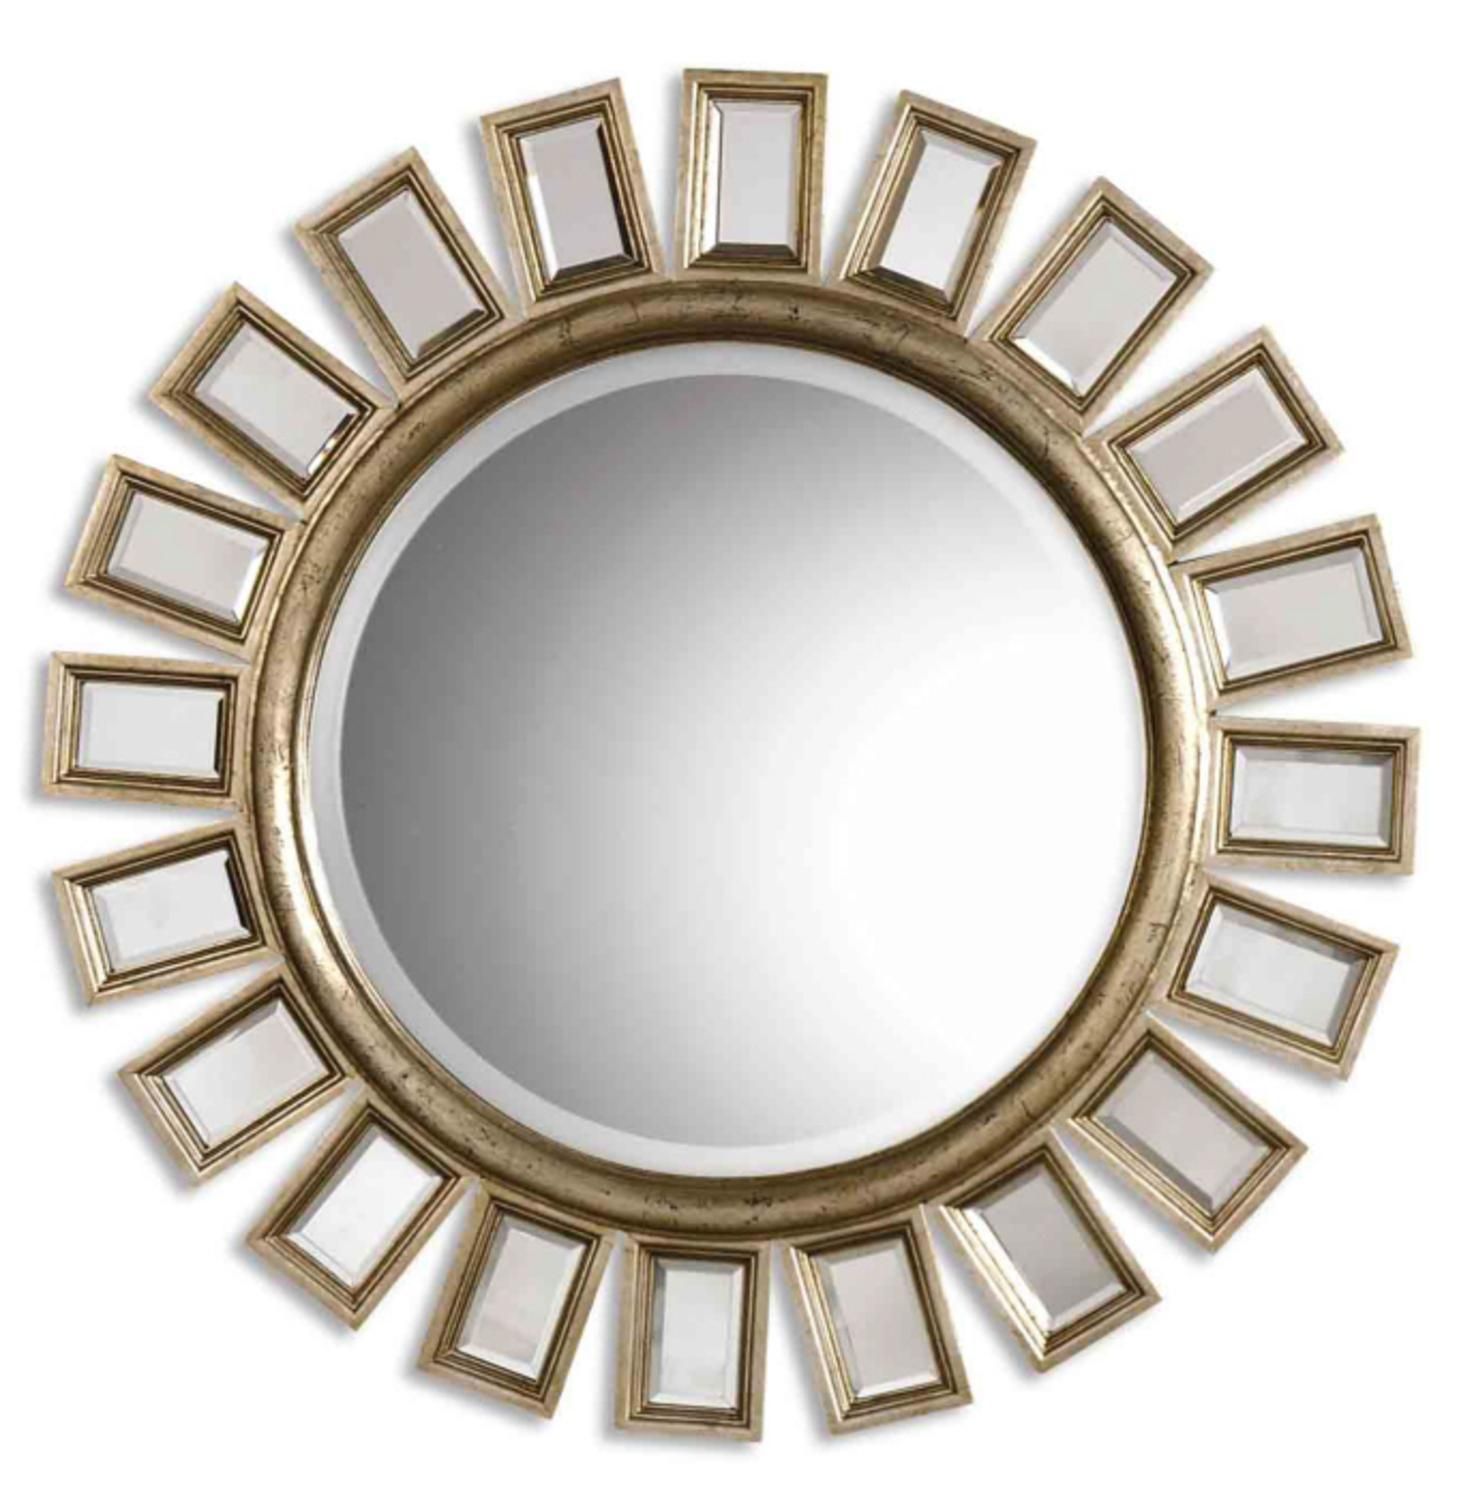 34" Distressed Silver Leaf Finish With Small Mirrors Framed Round Wall Throughout Scalloped Round Wall Mirrors (View 14 of 15)